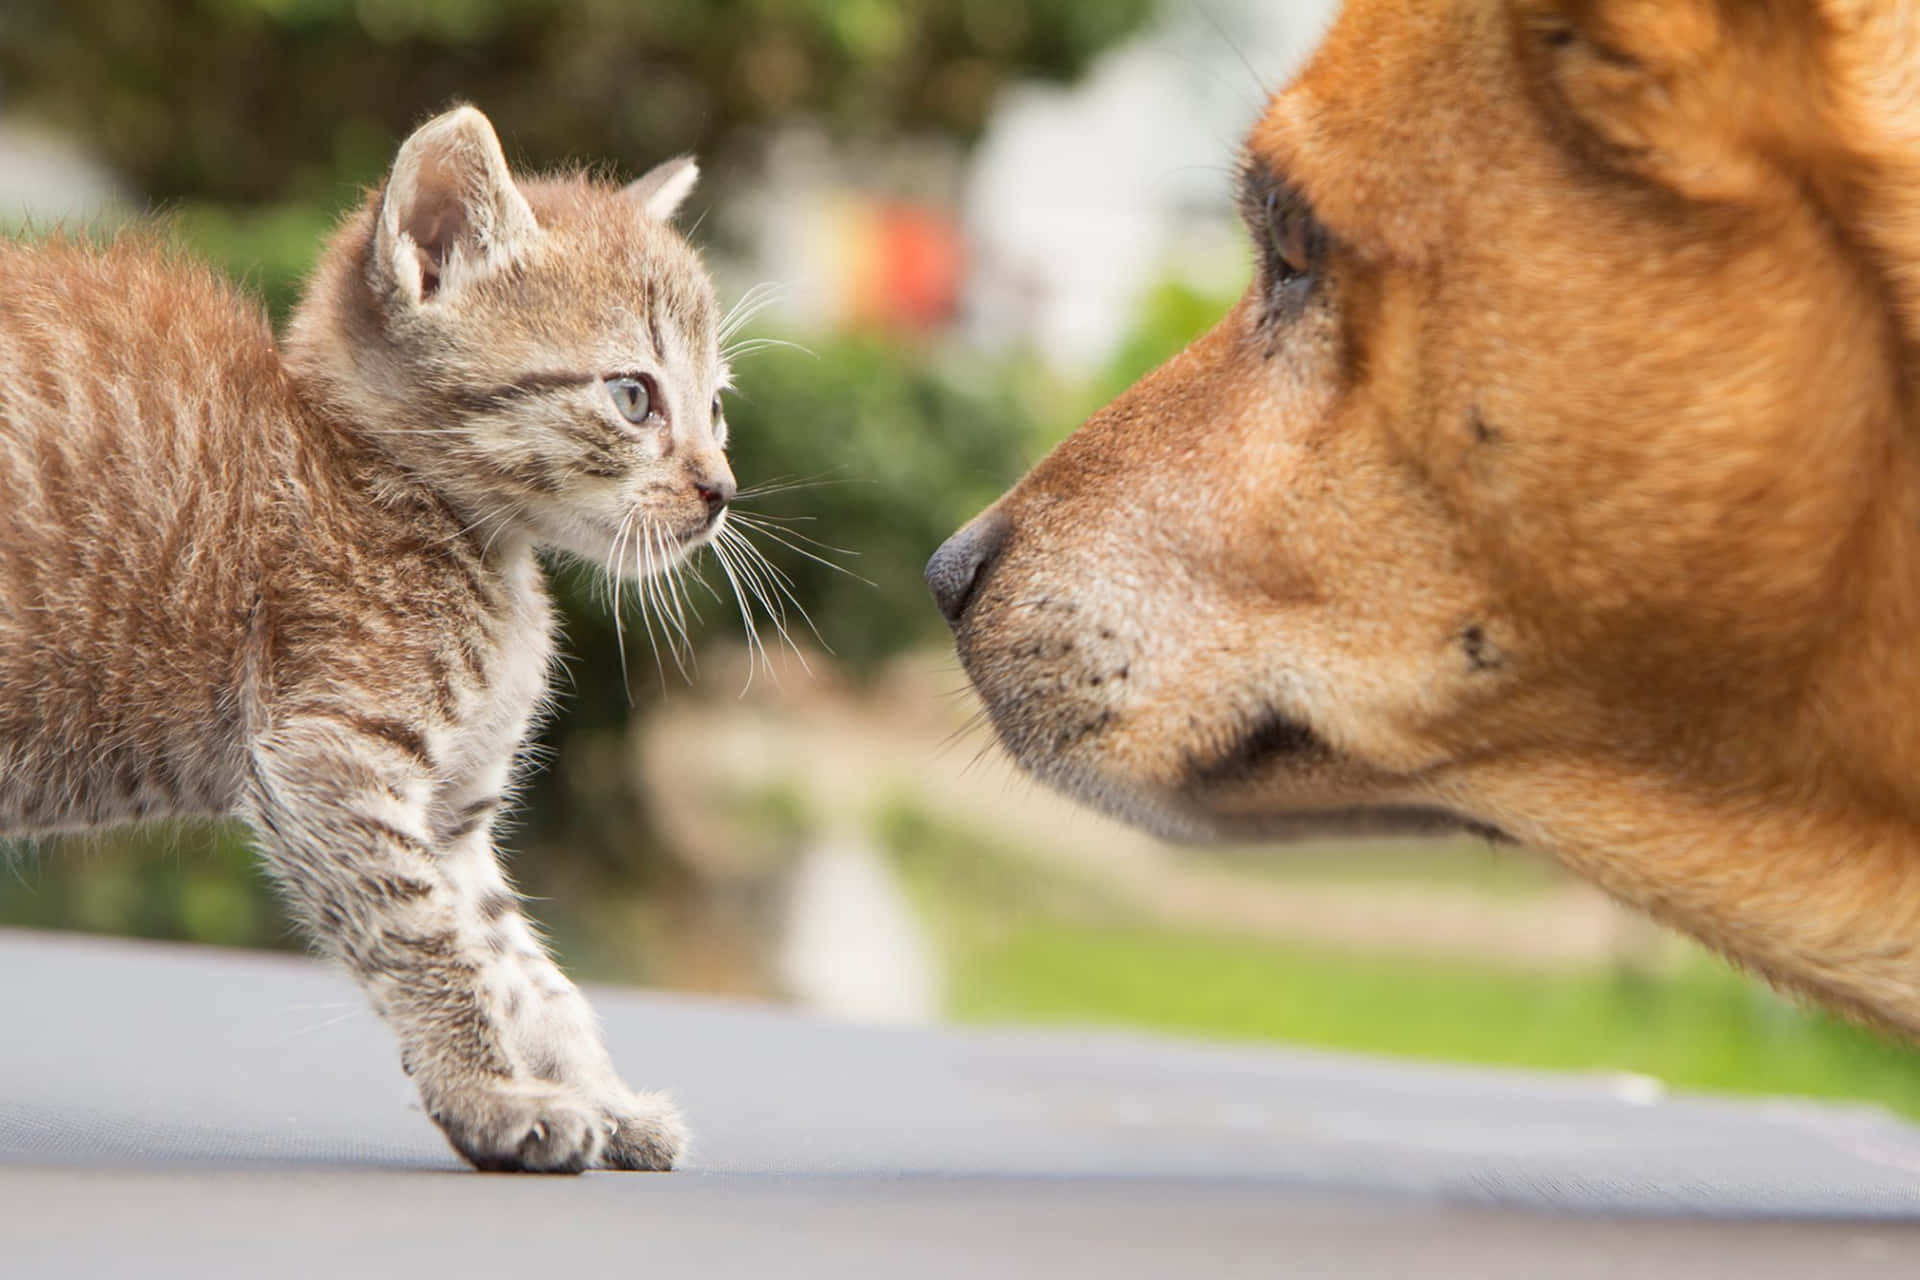 A Dog And A Kitten Are Looking At Each Other